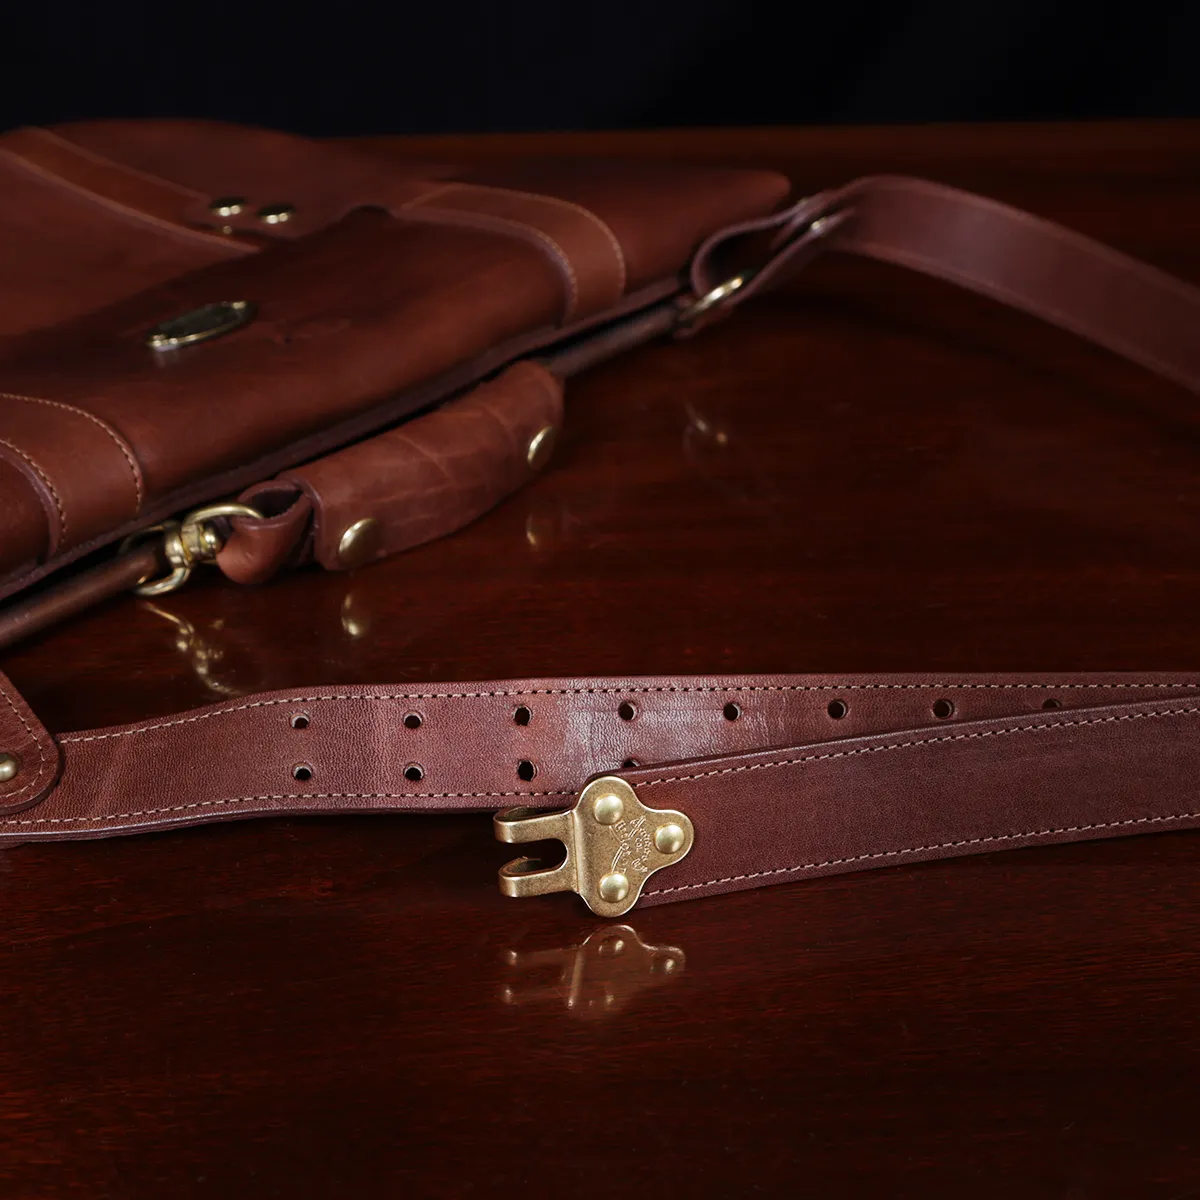 Leather Satchel Document Bag No. 16 - Best USA Made